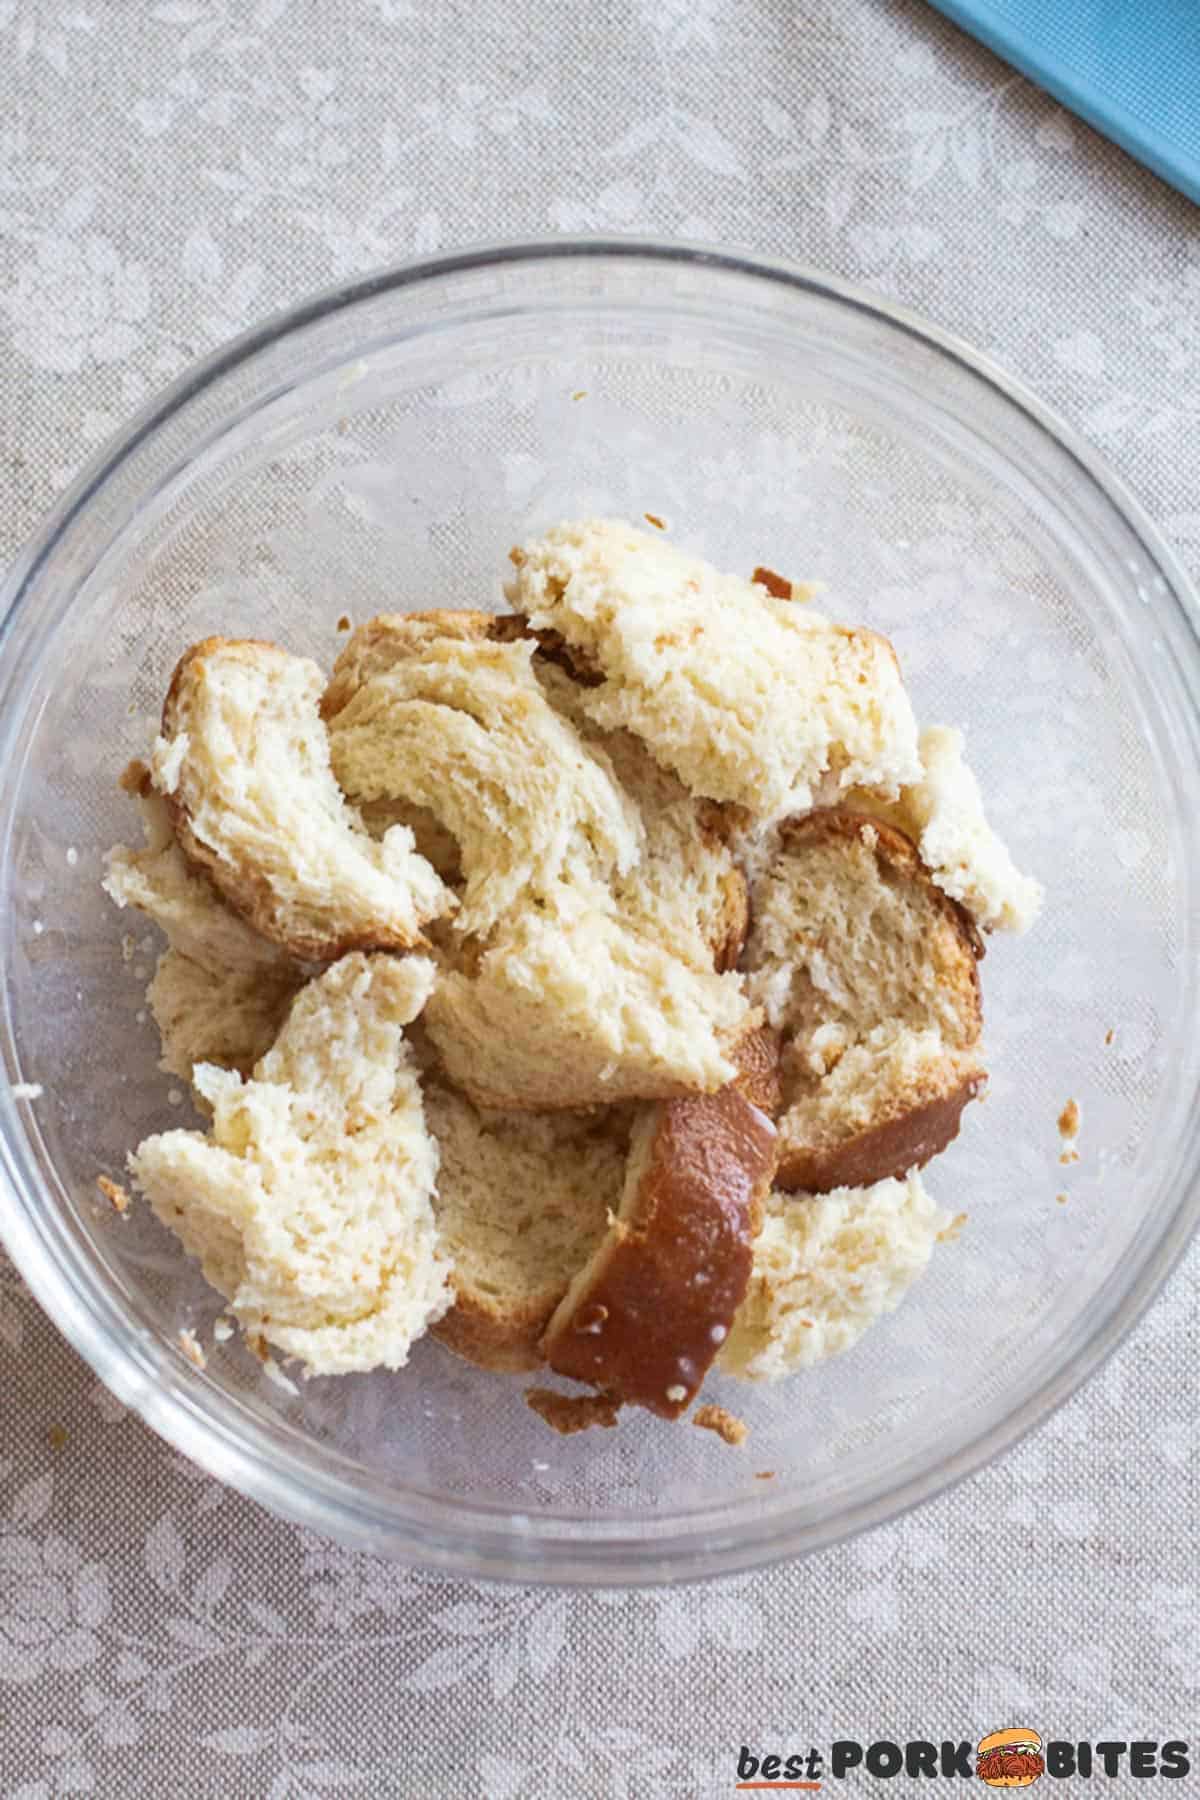 torn bread soaked in milk in a glass dish